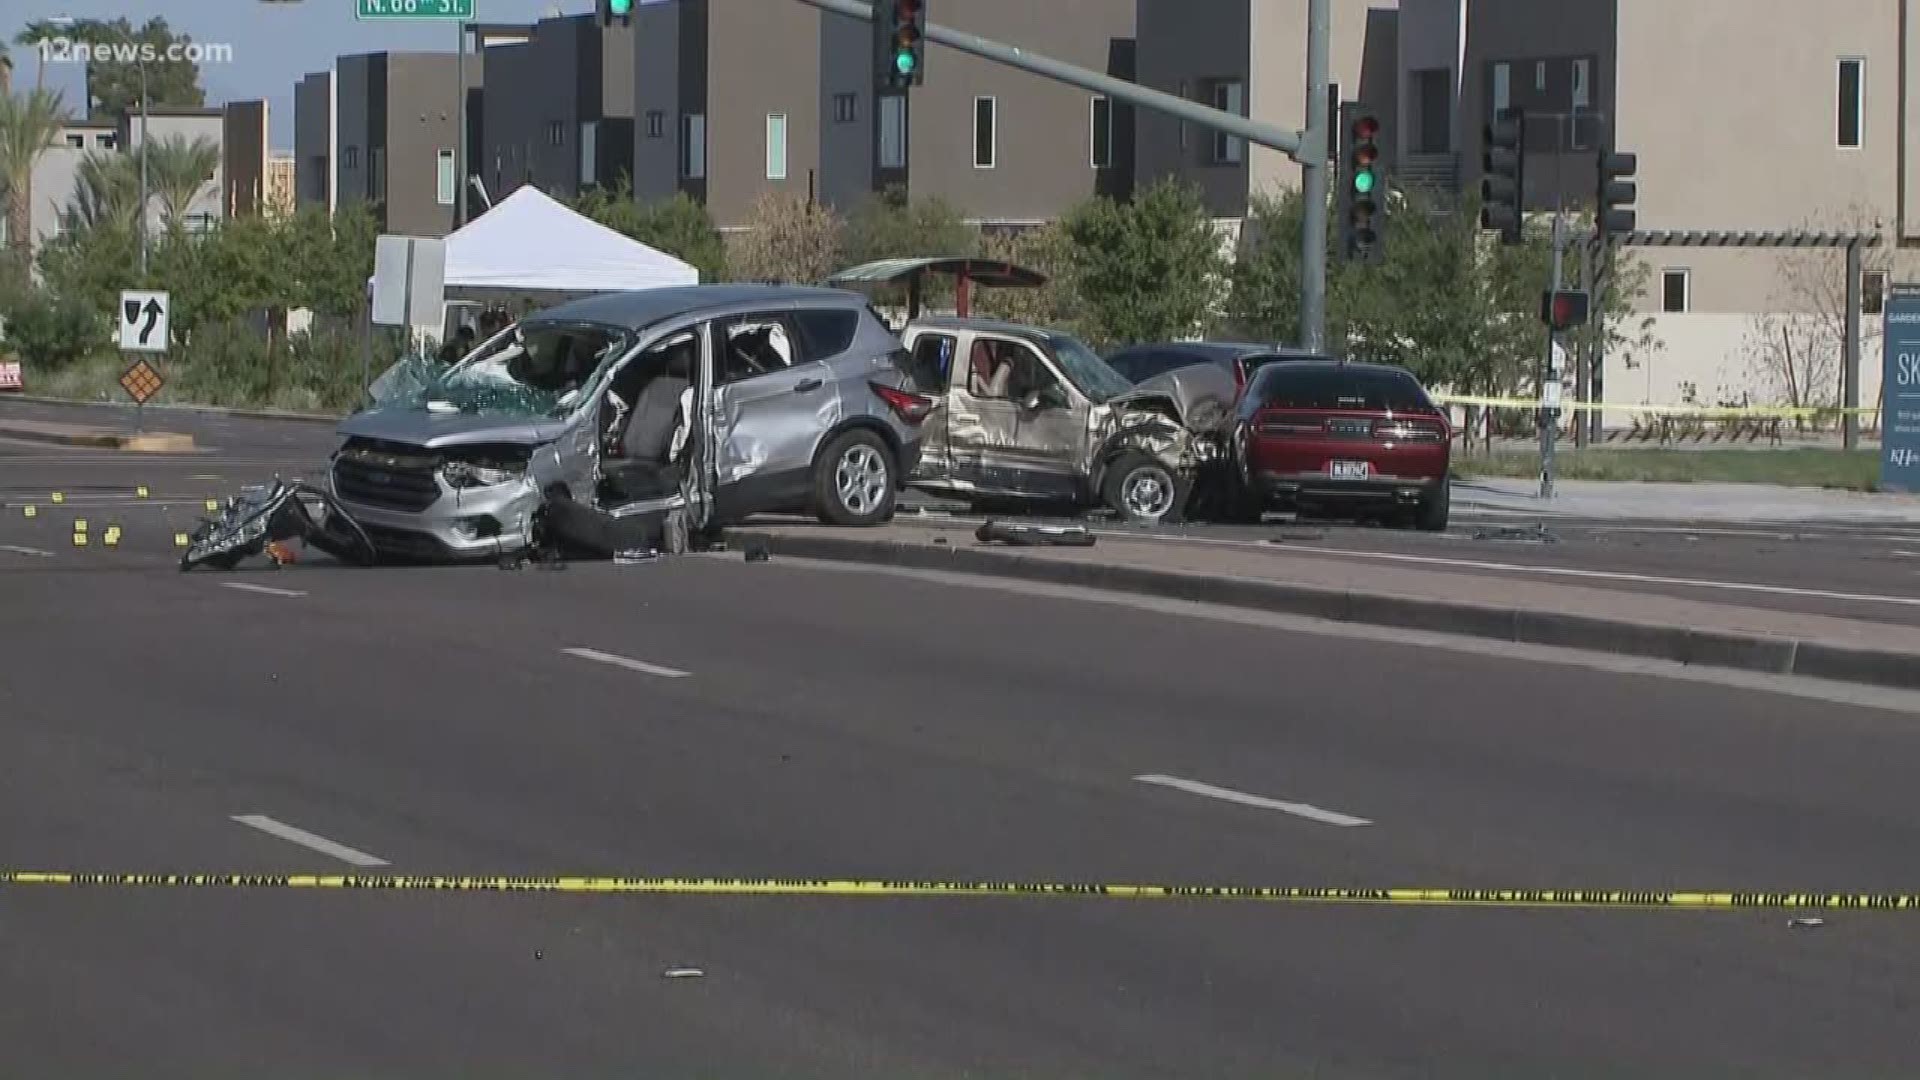 A police chase that started in Scottsdale ends in Tempe with the suspects of a robbery running a red light and causing a major crash involving five cars. The crash happened at 68th Street and McDowell. Five people were sent to the hospital.